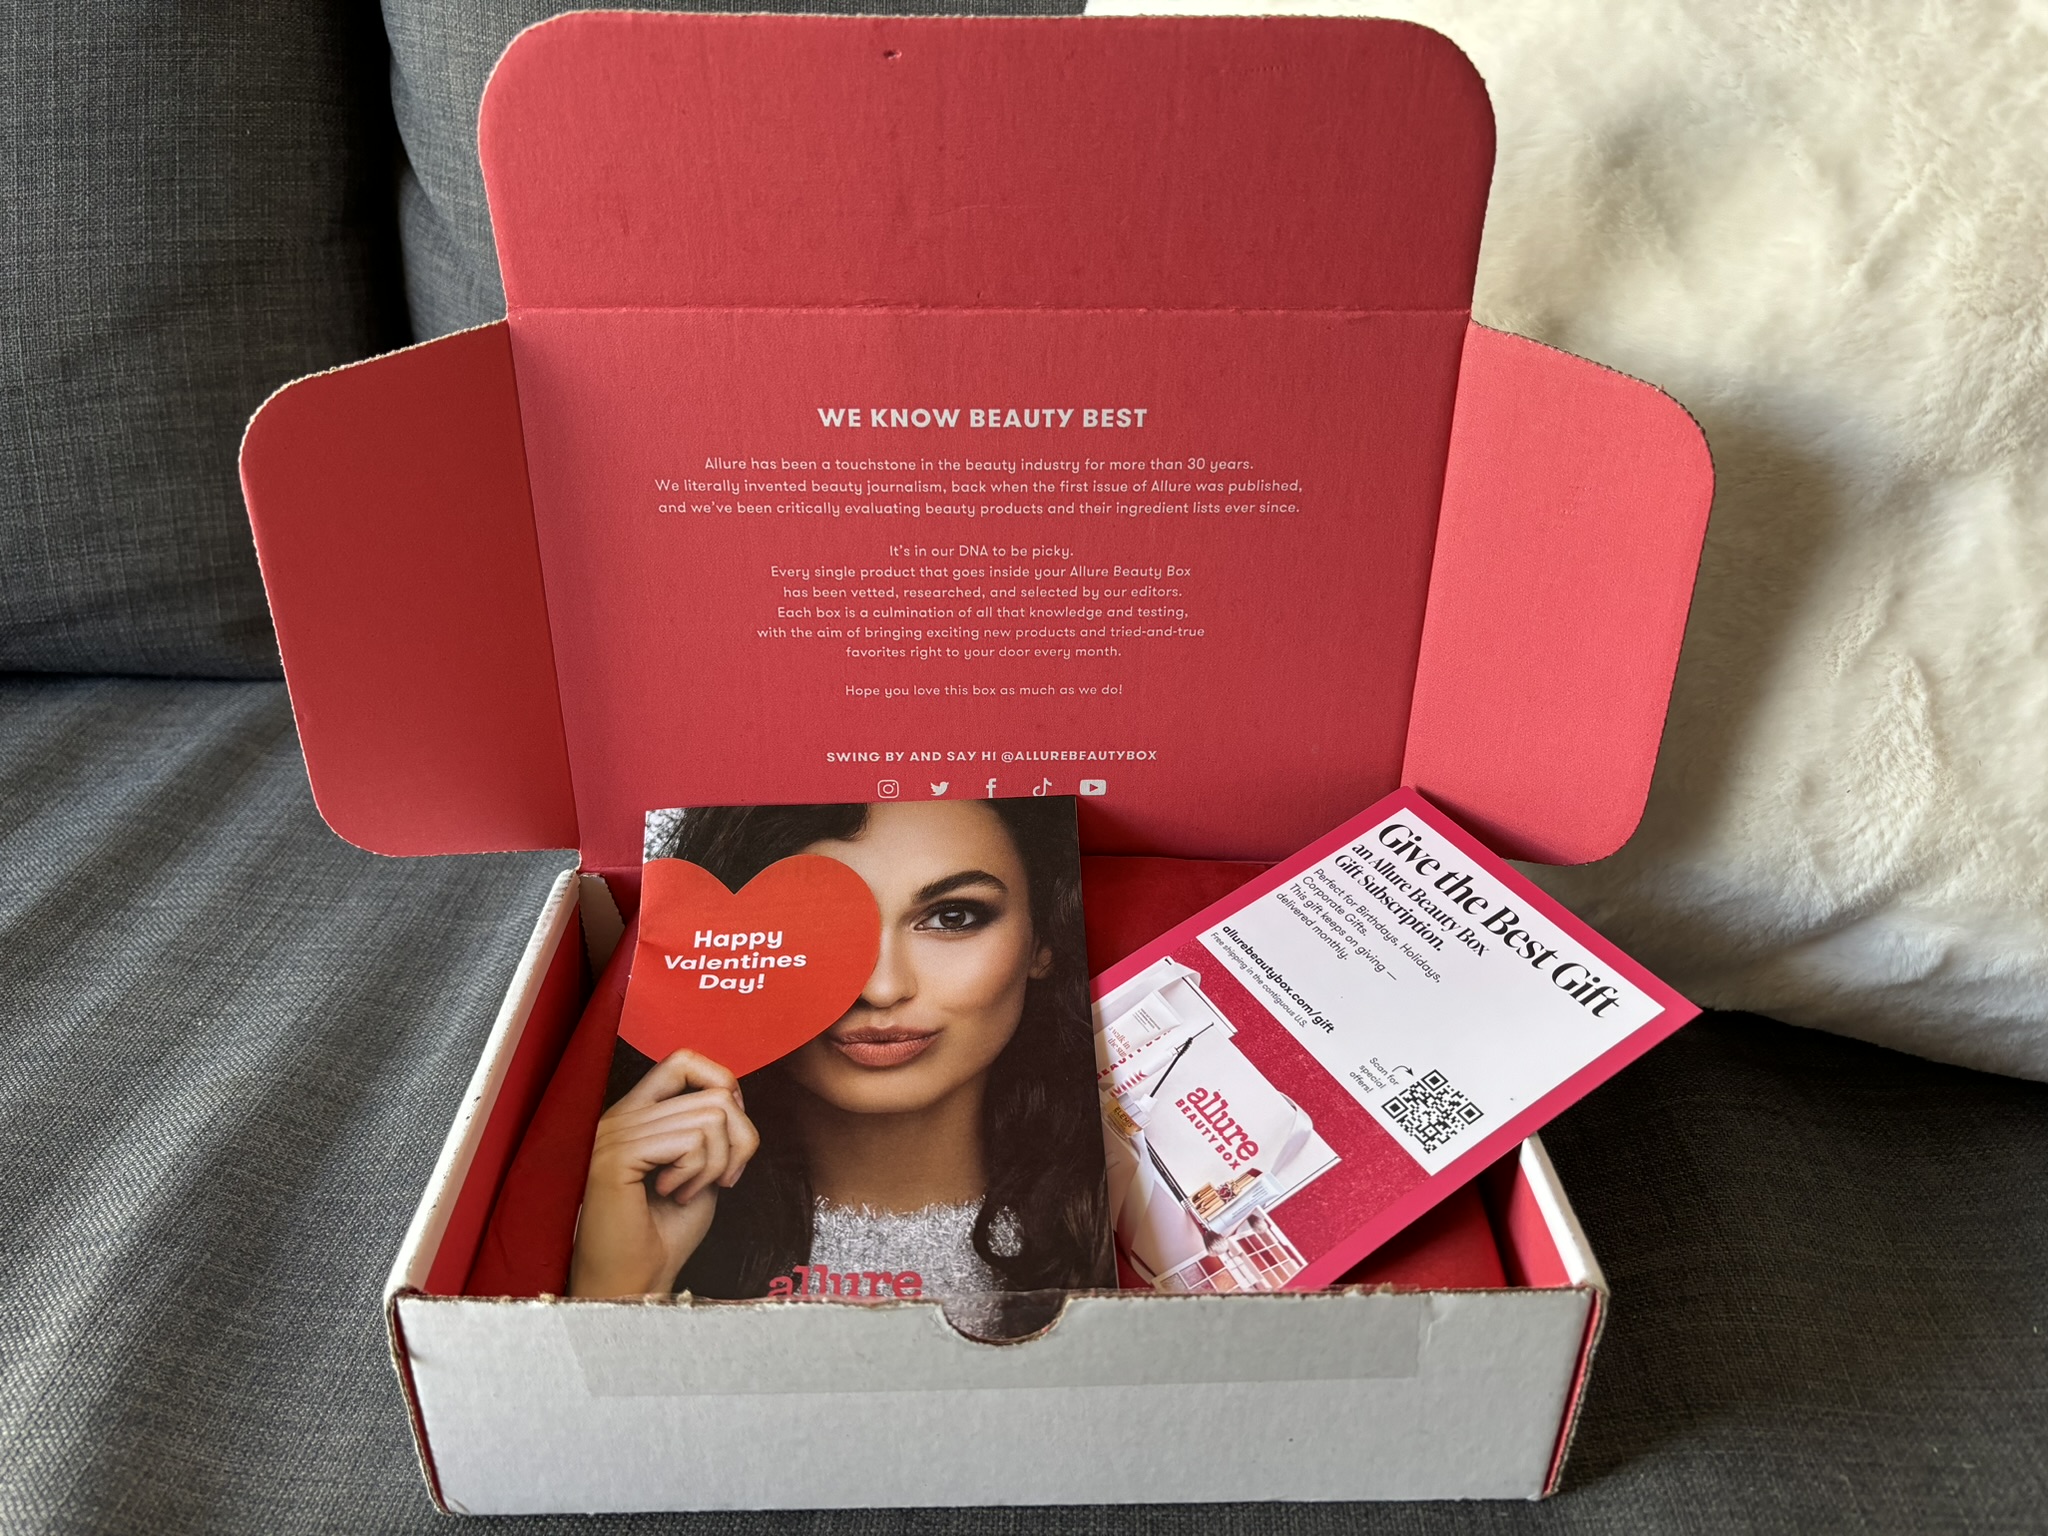 Allure Beauty Box with lipstick, skincare products, and informational pamphlet